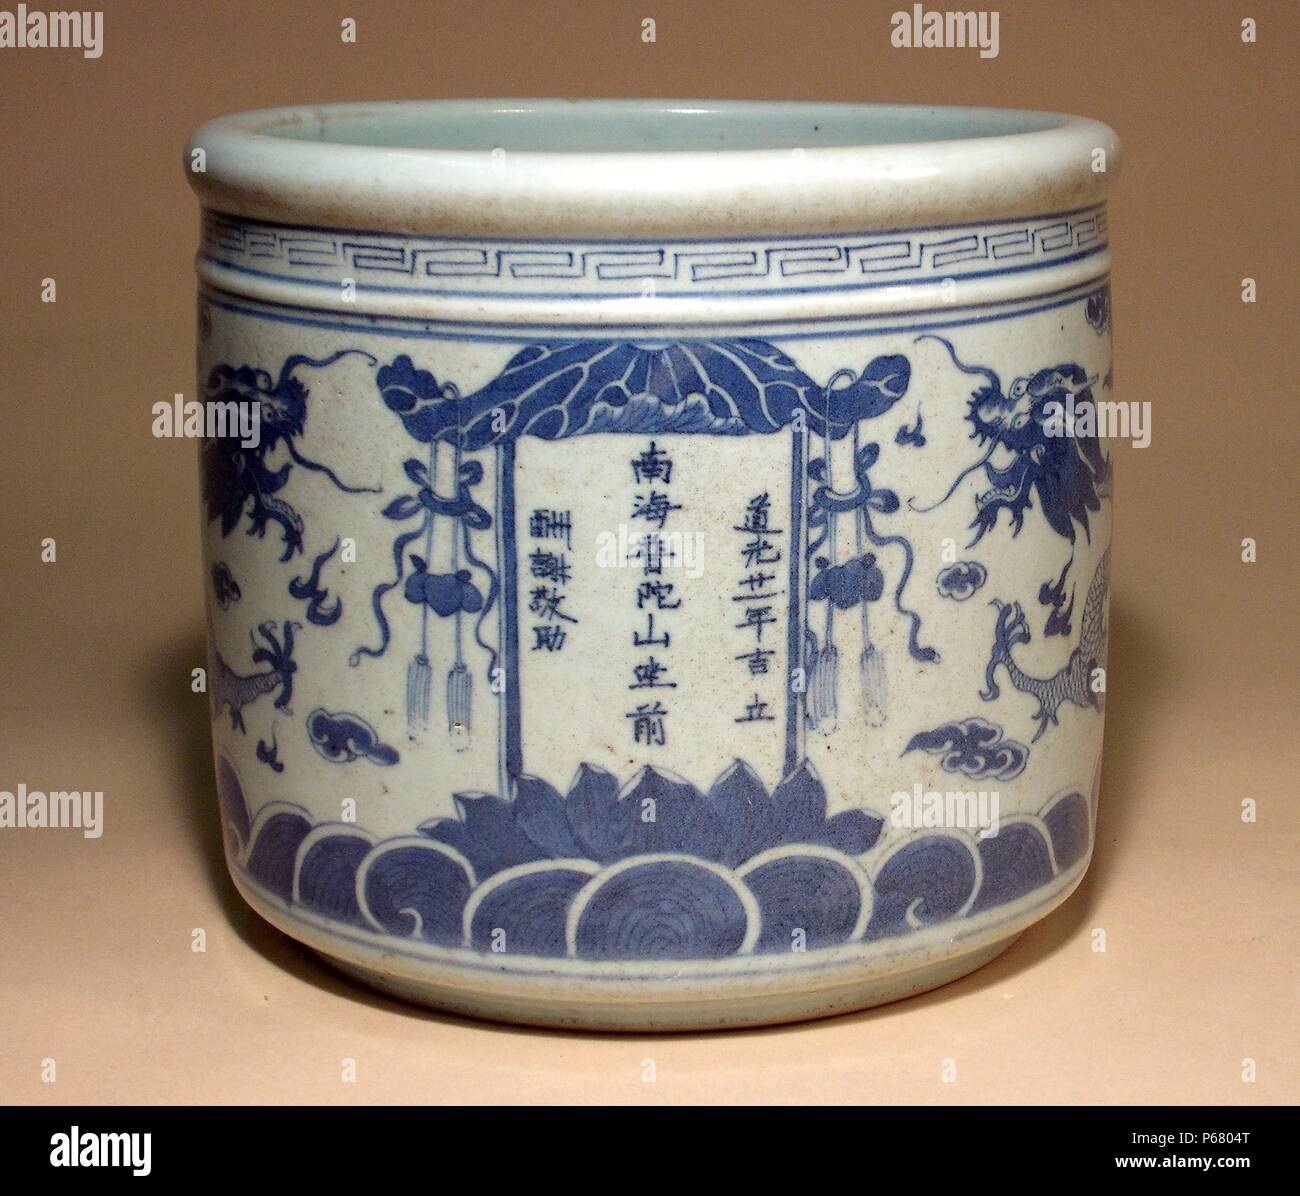 Ancient China: Cylindrical jar with dragon decorations; Qing Dynasty, 1644 - 1912 AD. Blue-and-white ceramic. Stock Photo